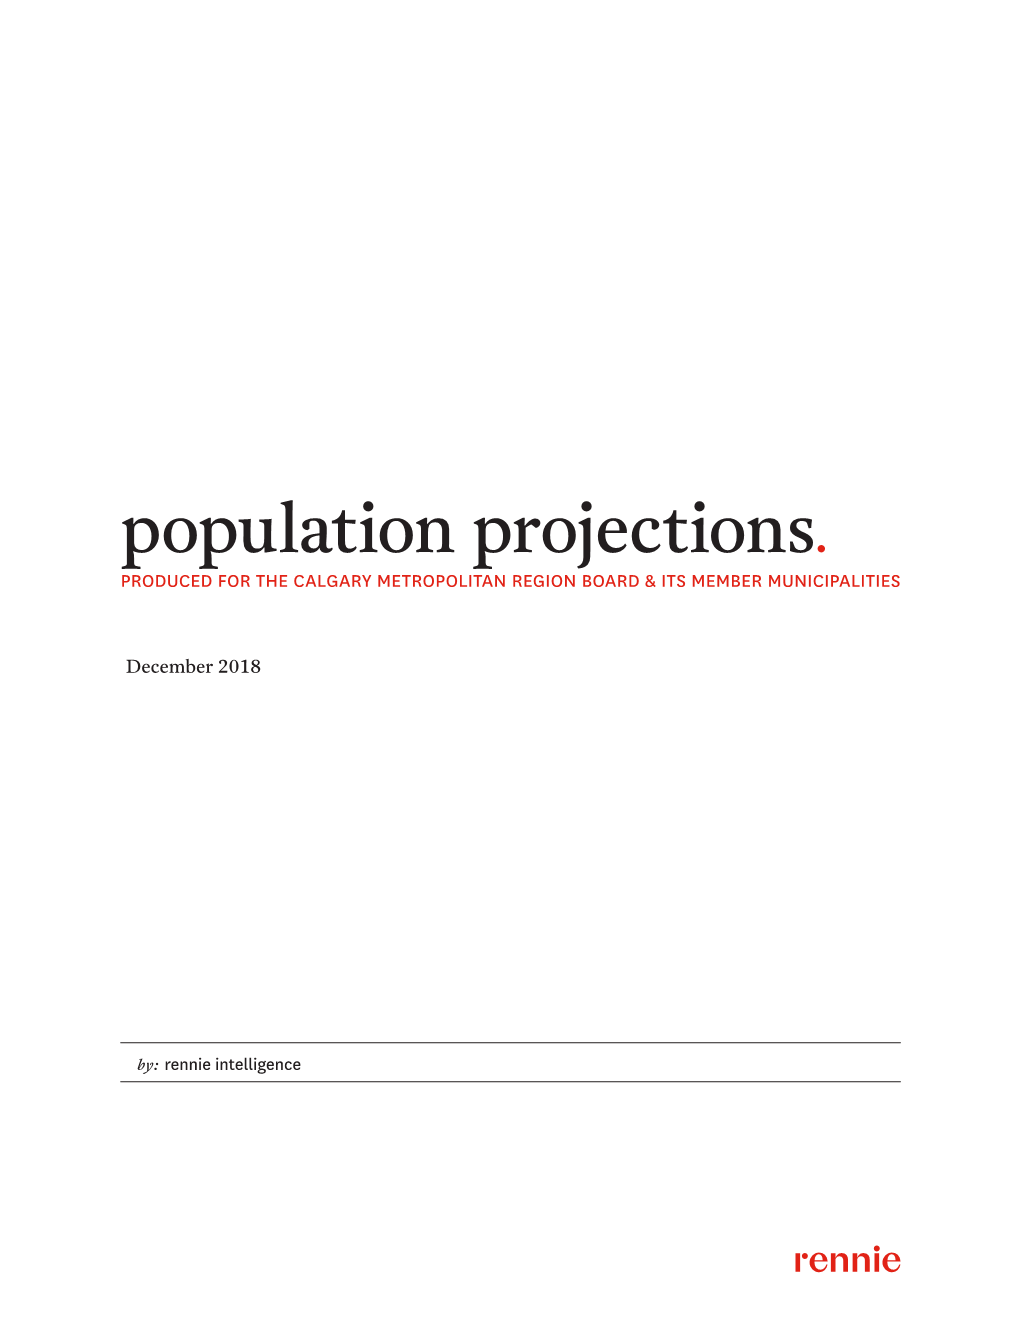 Population Projections. PRODUCED for the CALGARY METROPOLITAN REGION BOARD & ITS MEMBER MUNICIPALITIES